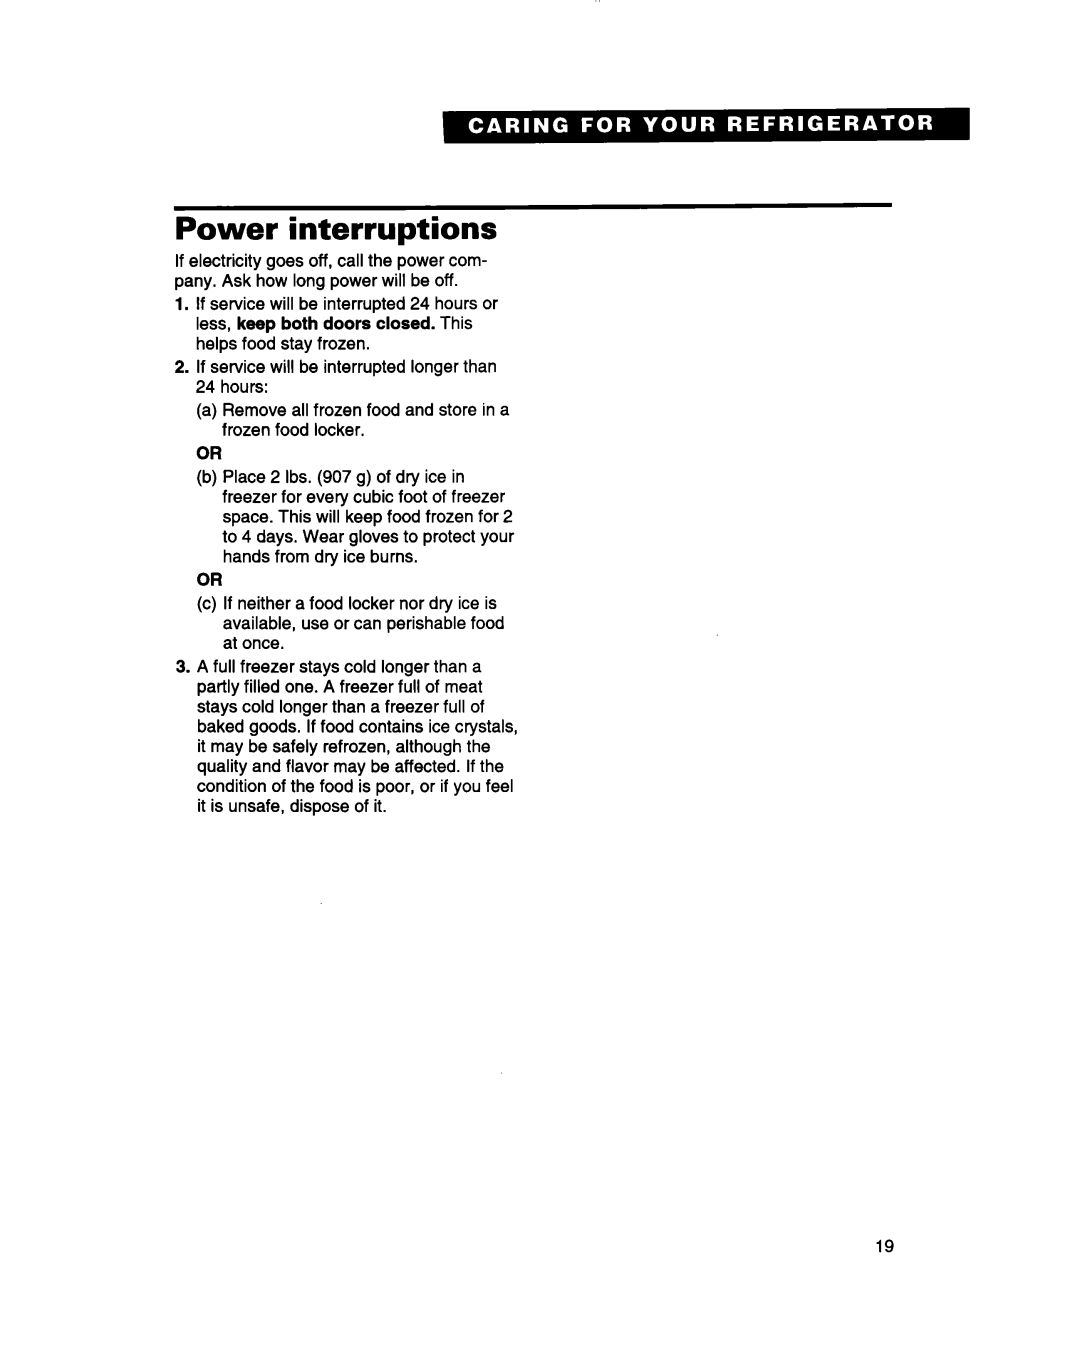 Whirlpool 2183013 warranty Power interruptions, If service will be interrupted longer than, hours 